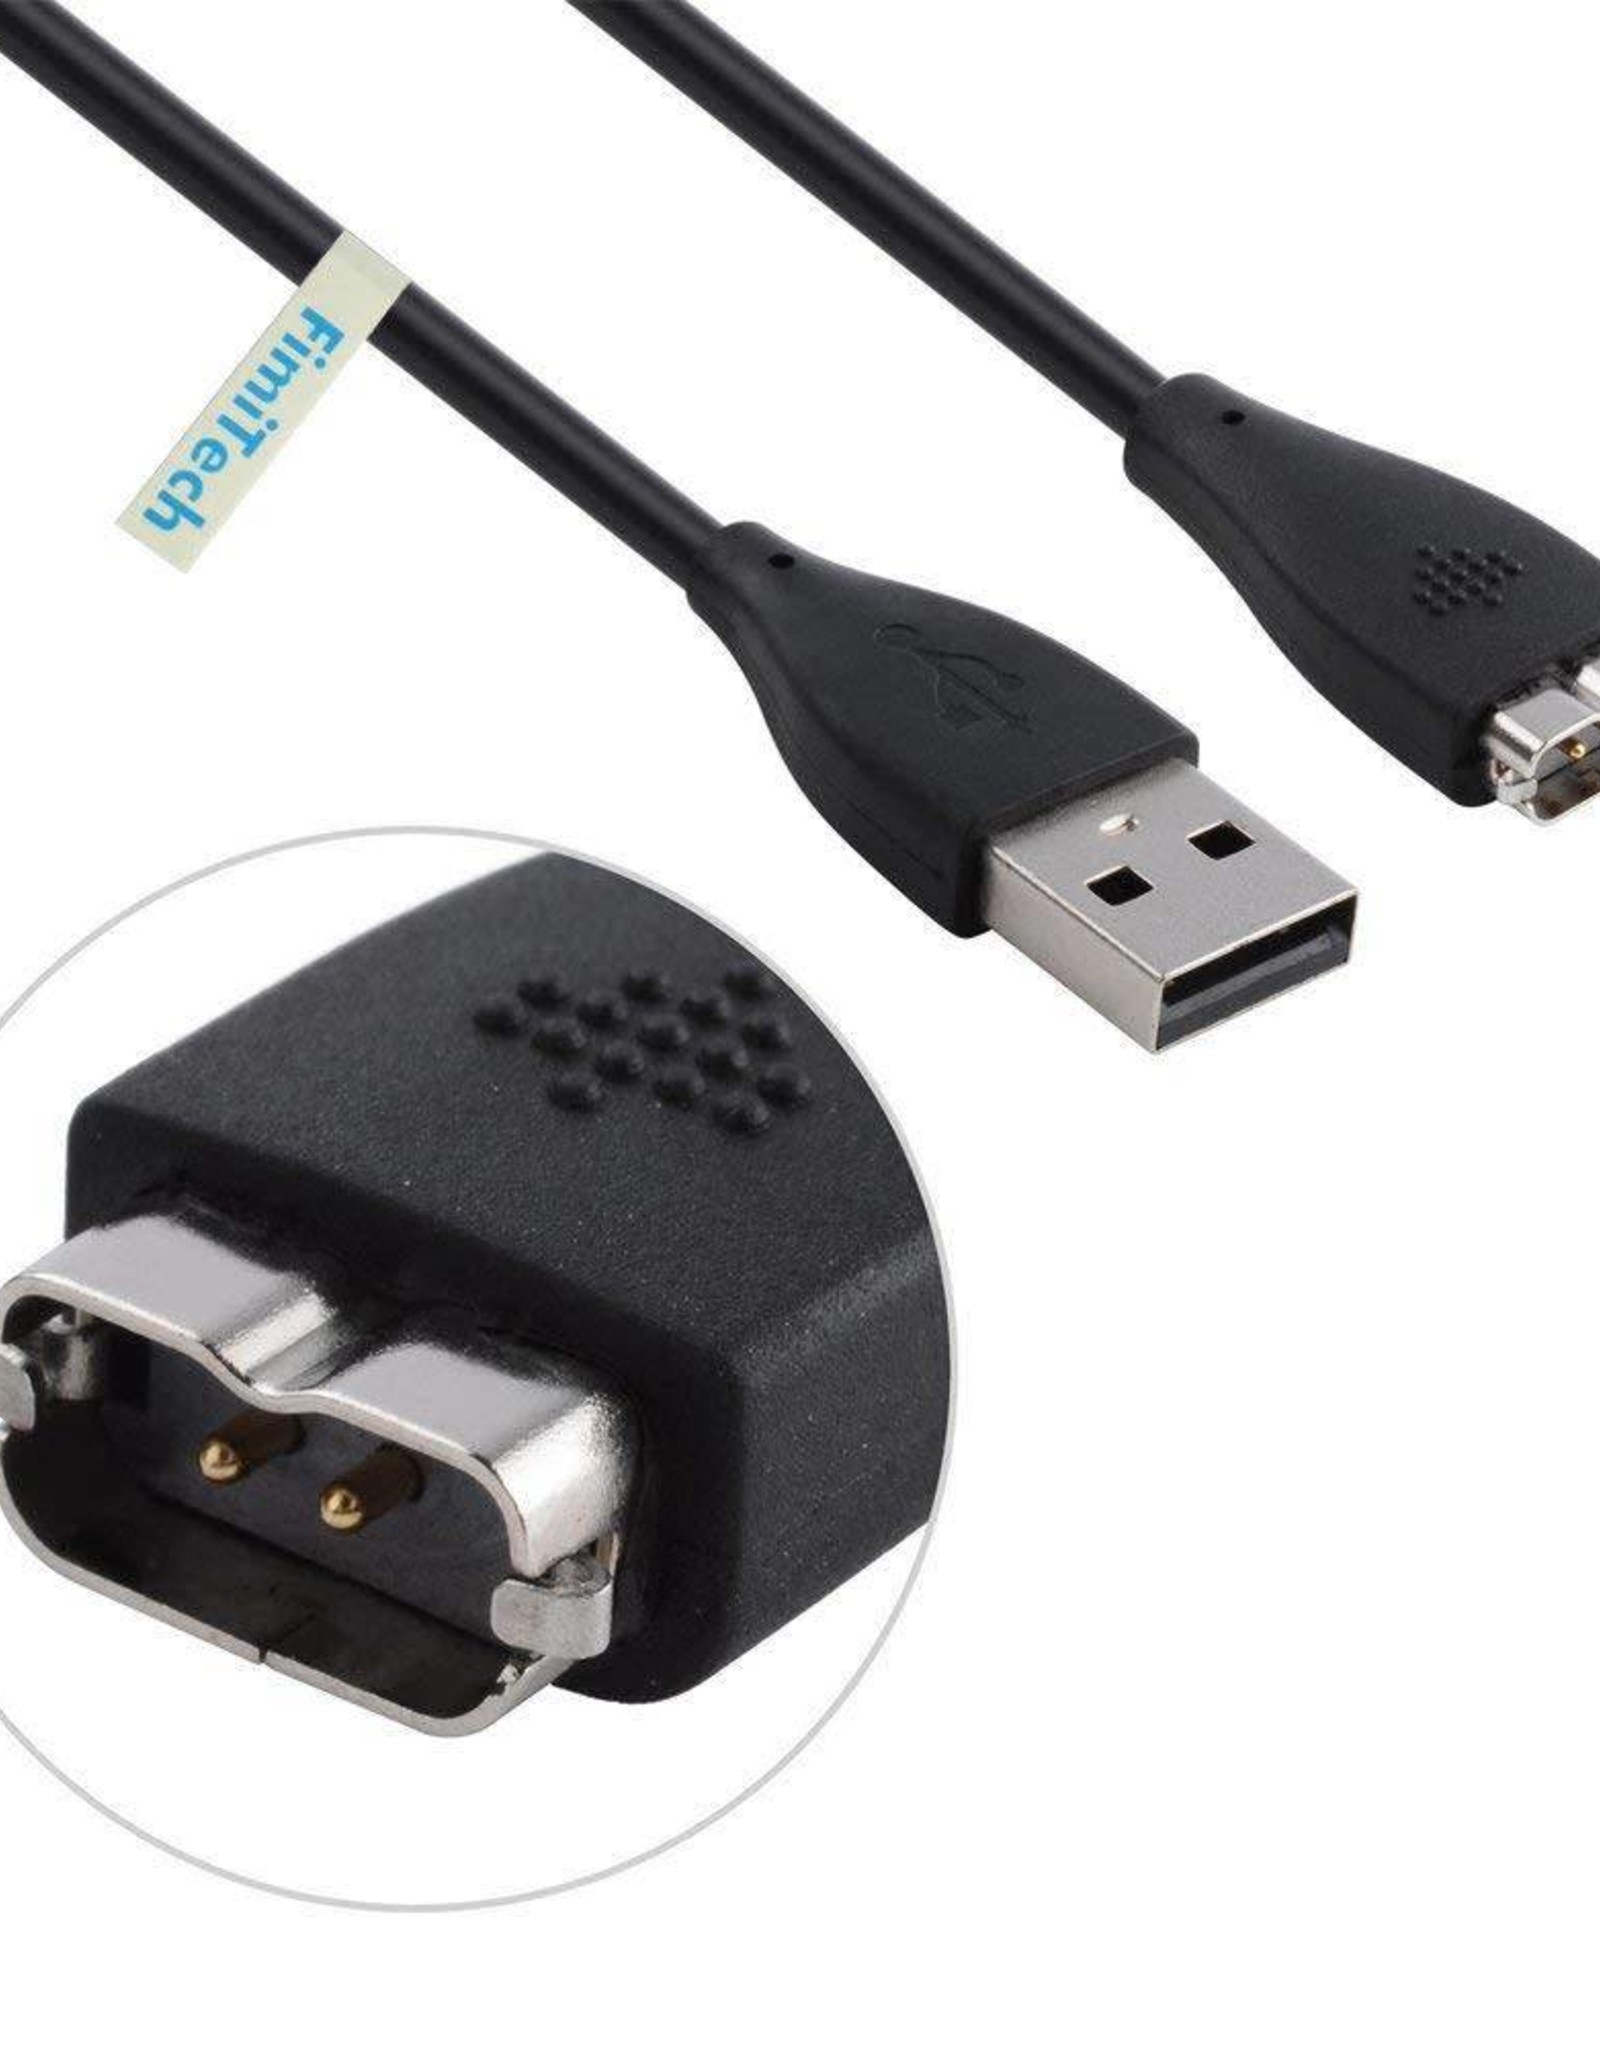 fitbit usb cable